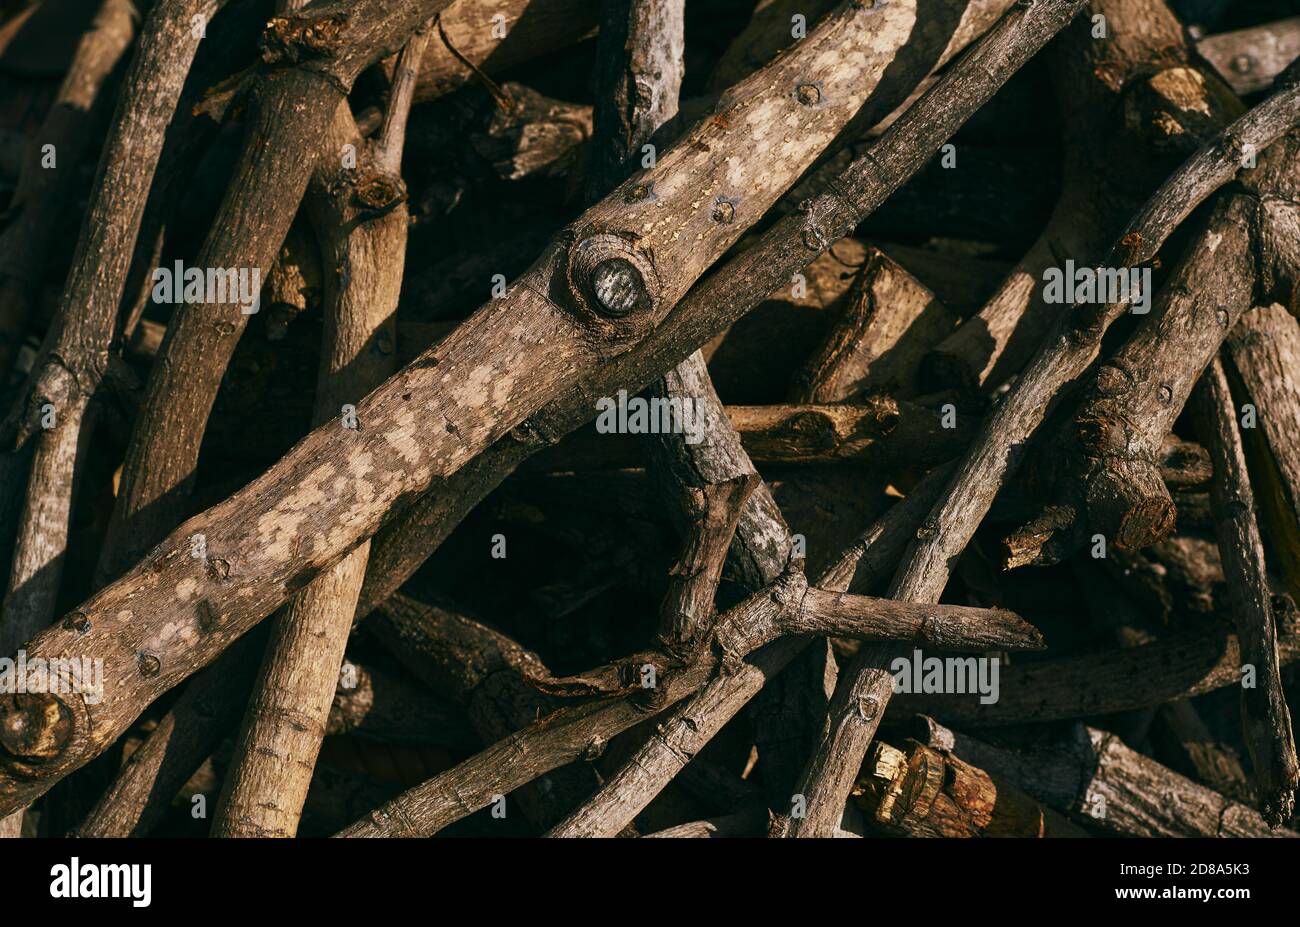 A closeup view of a firewood pile Stock Photo